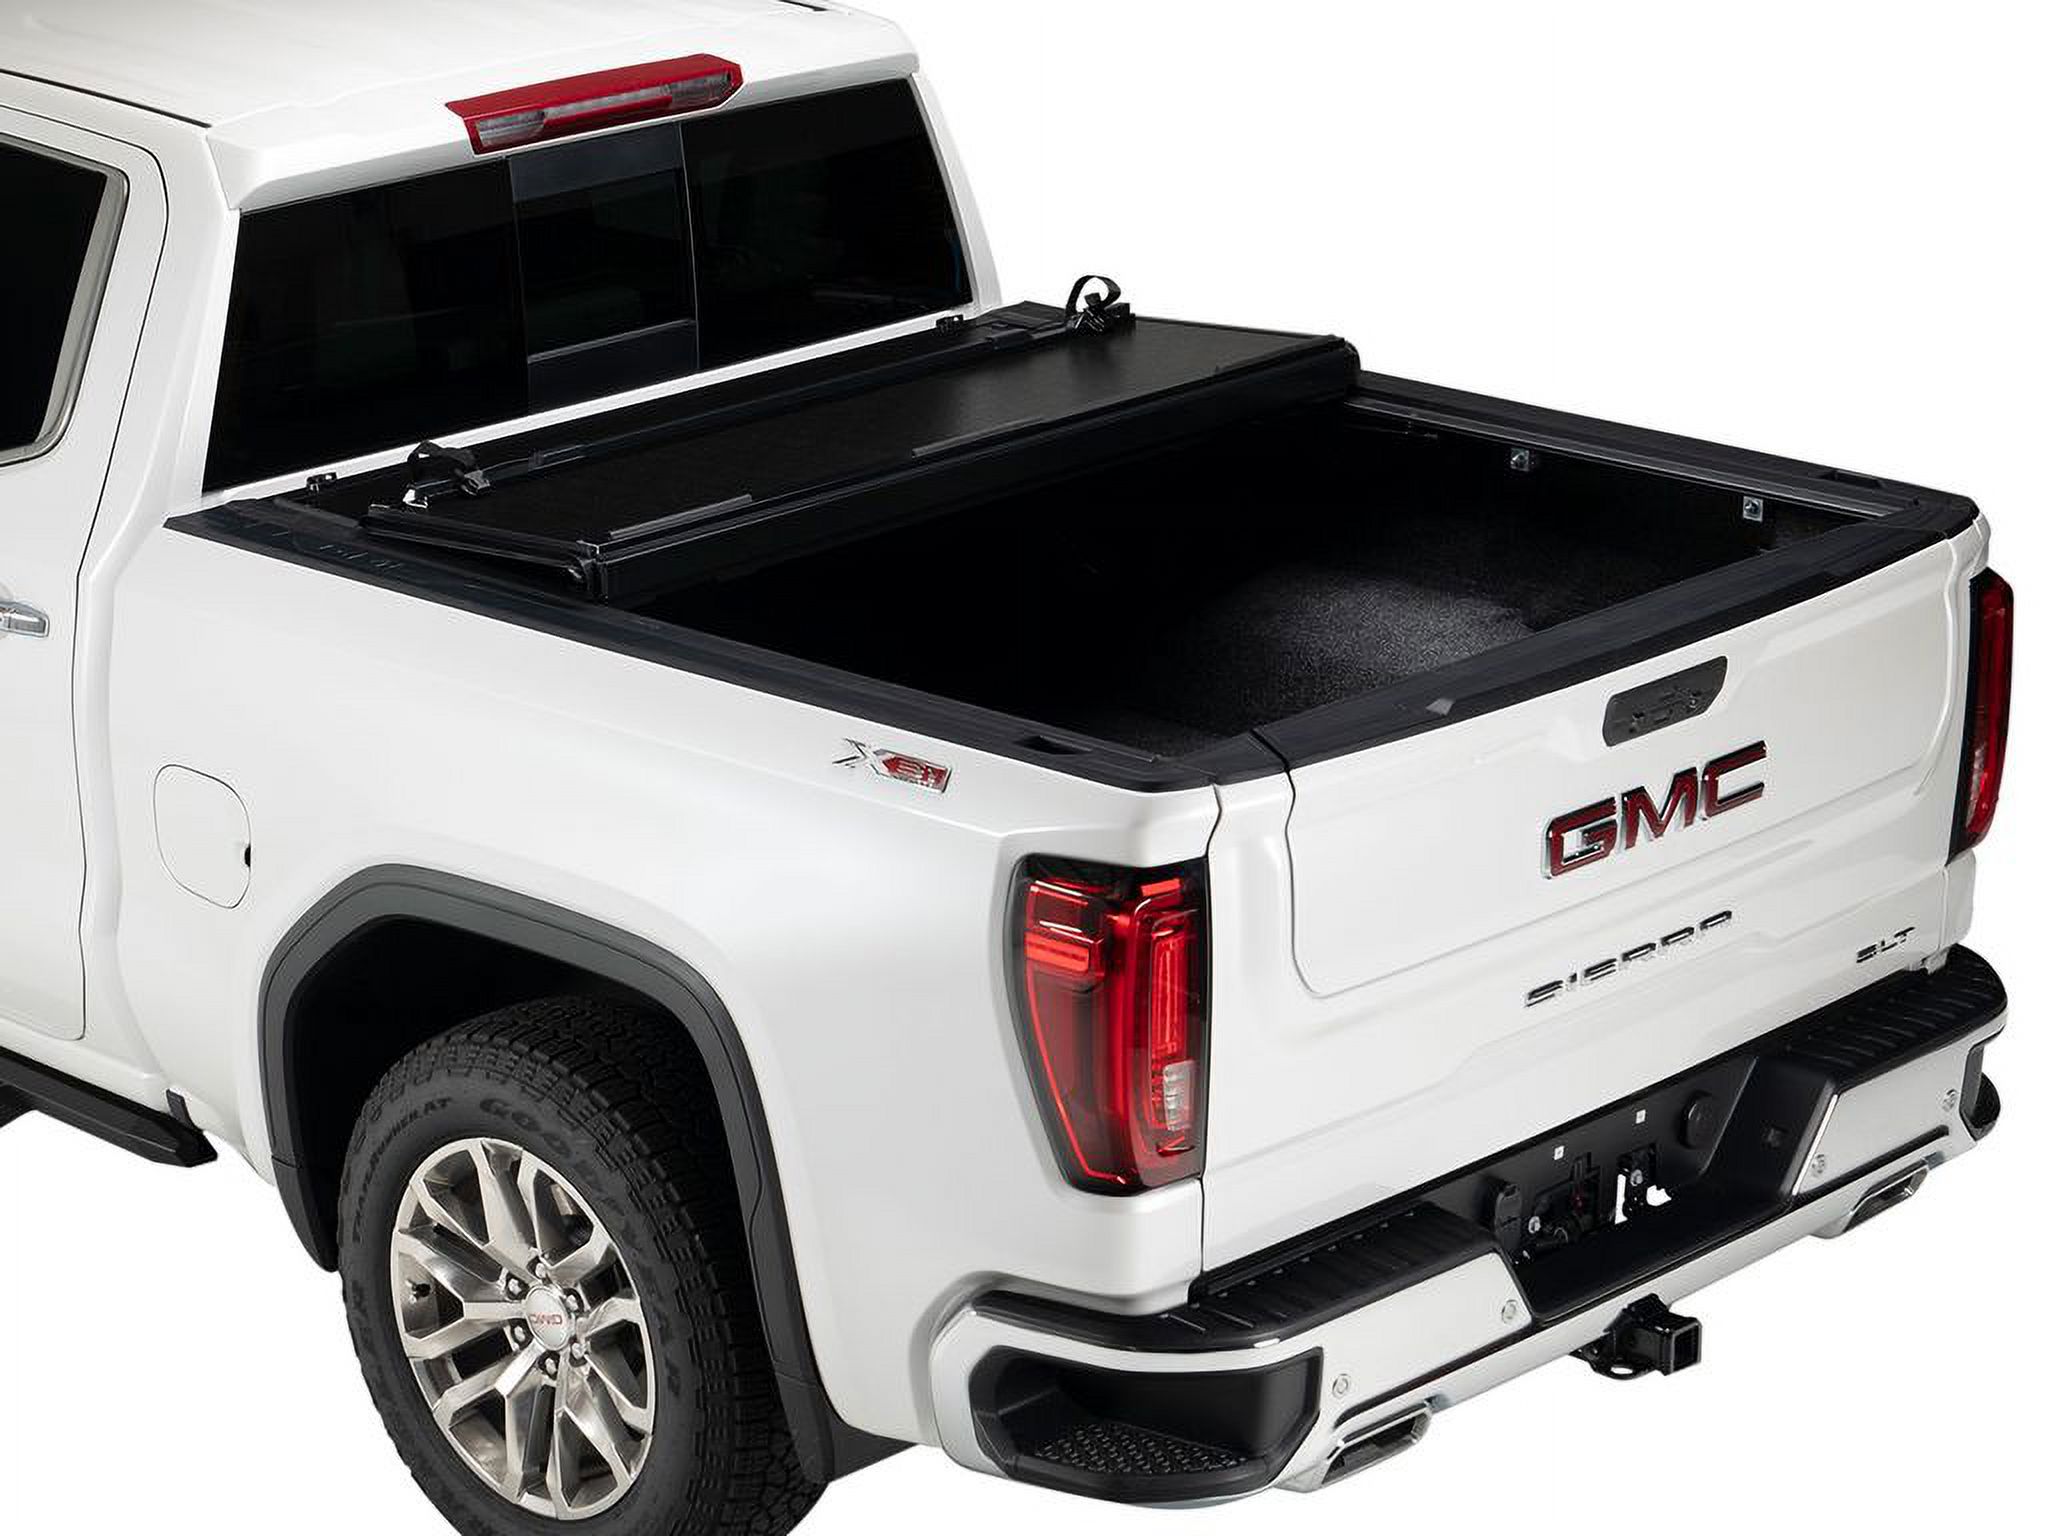 Gator by RealTruck FX Hard Folding Truck Bed Tonneau Cover | 8828409 | Compatible with 2007-2021 Toyota Tundra w/o Track System, Will Not Work With Trail Edition Models 5' 1" Bed (60.5") - image 3 of 9